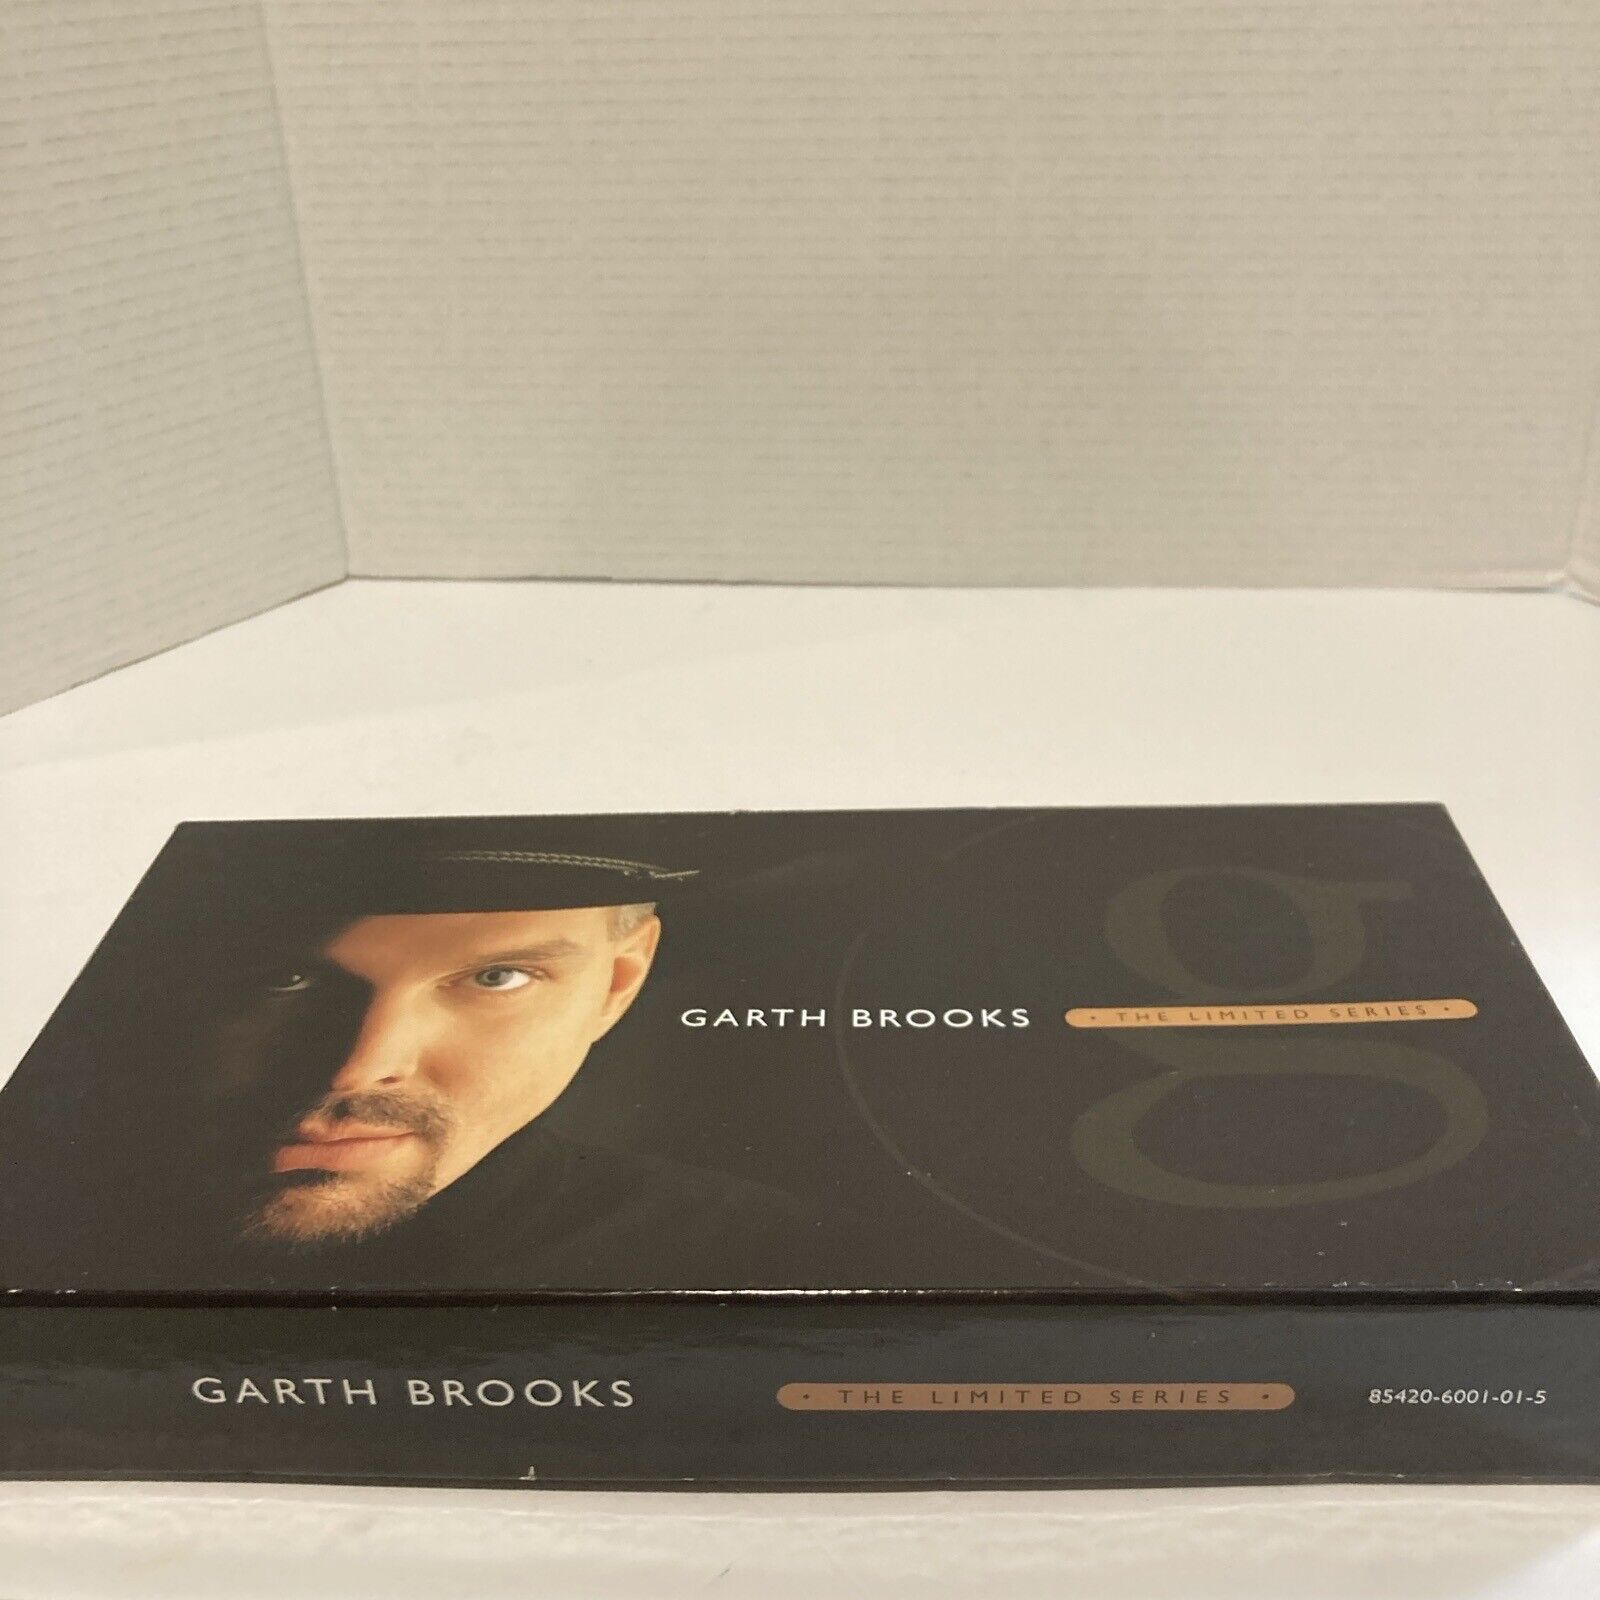 Garth Brooks Limited Series Box Of 5 CD’S and Book On His Life